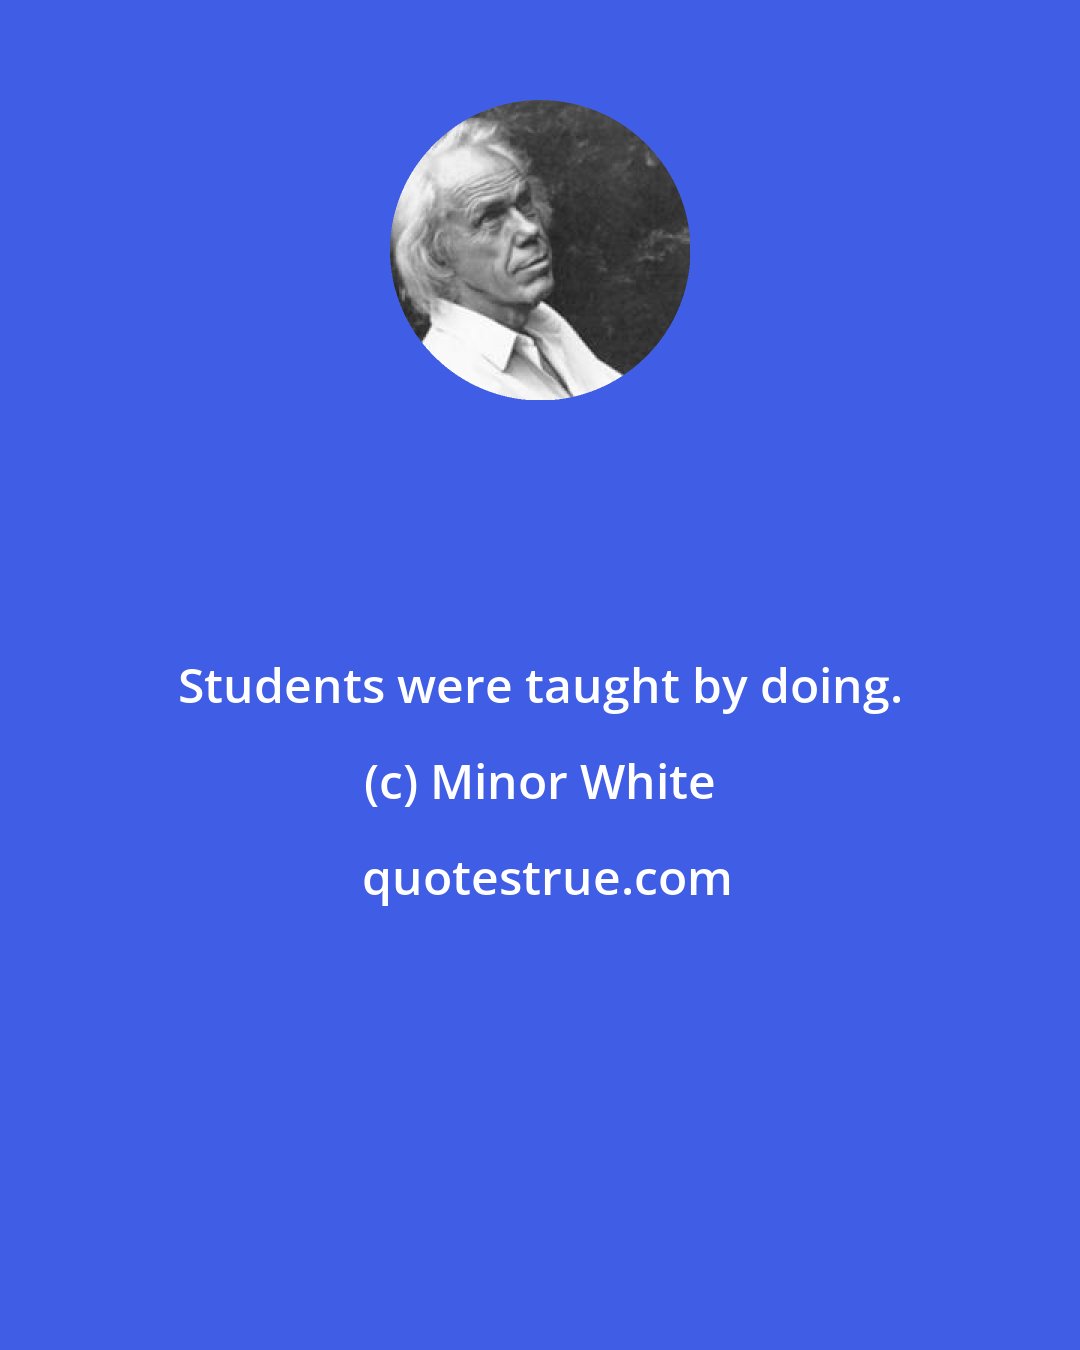 Minor White: Students were taught by doing.